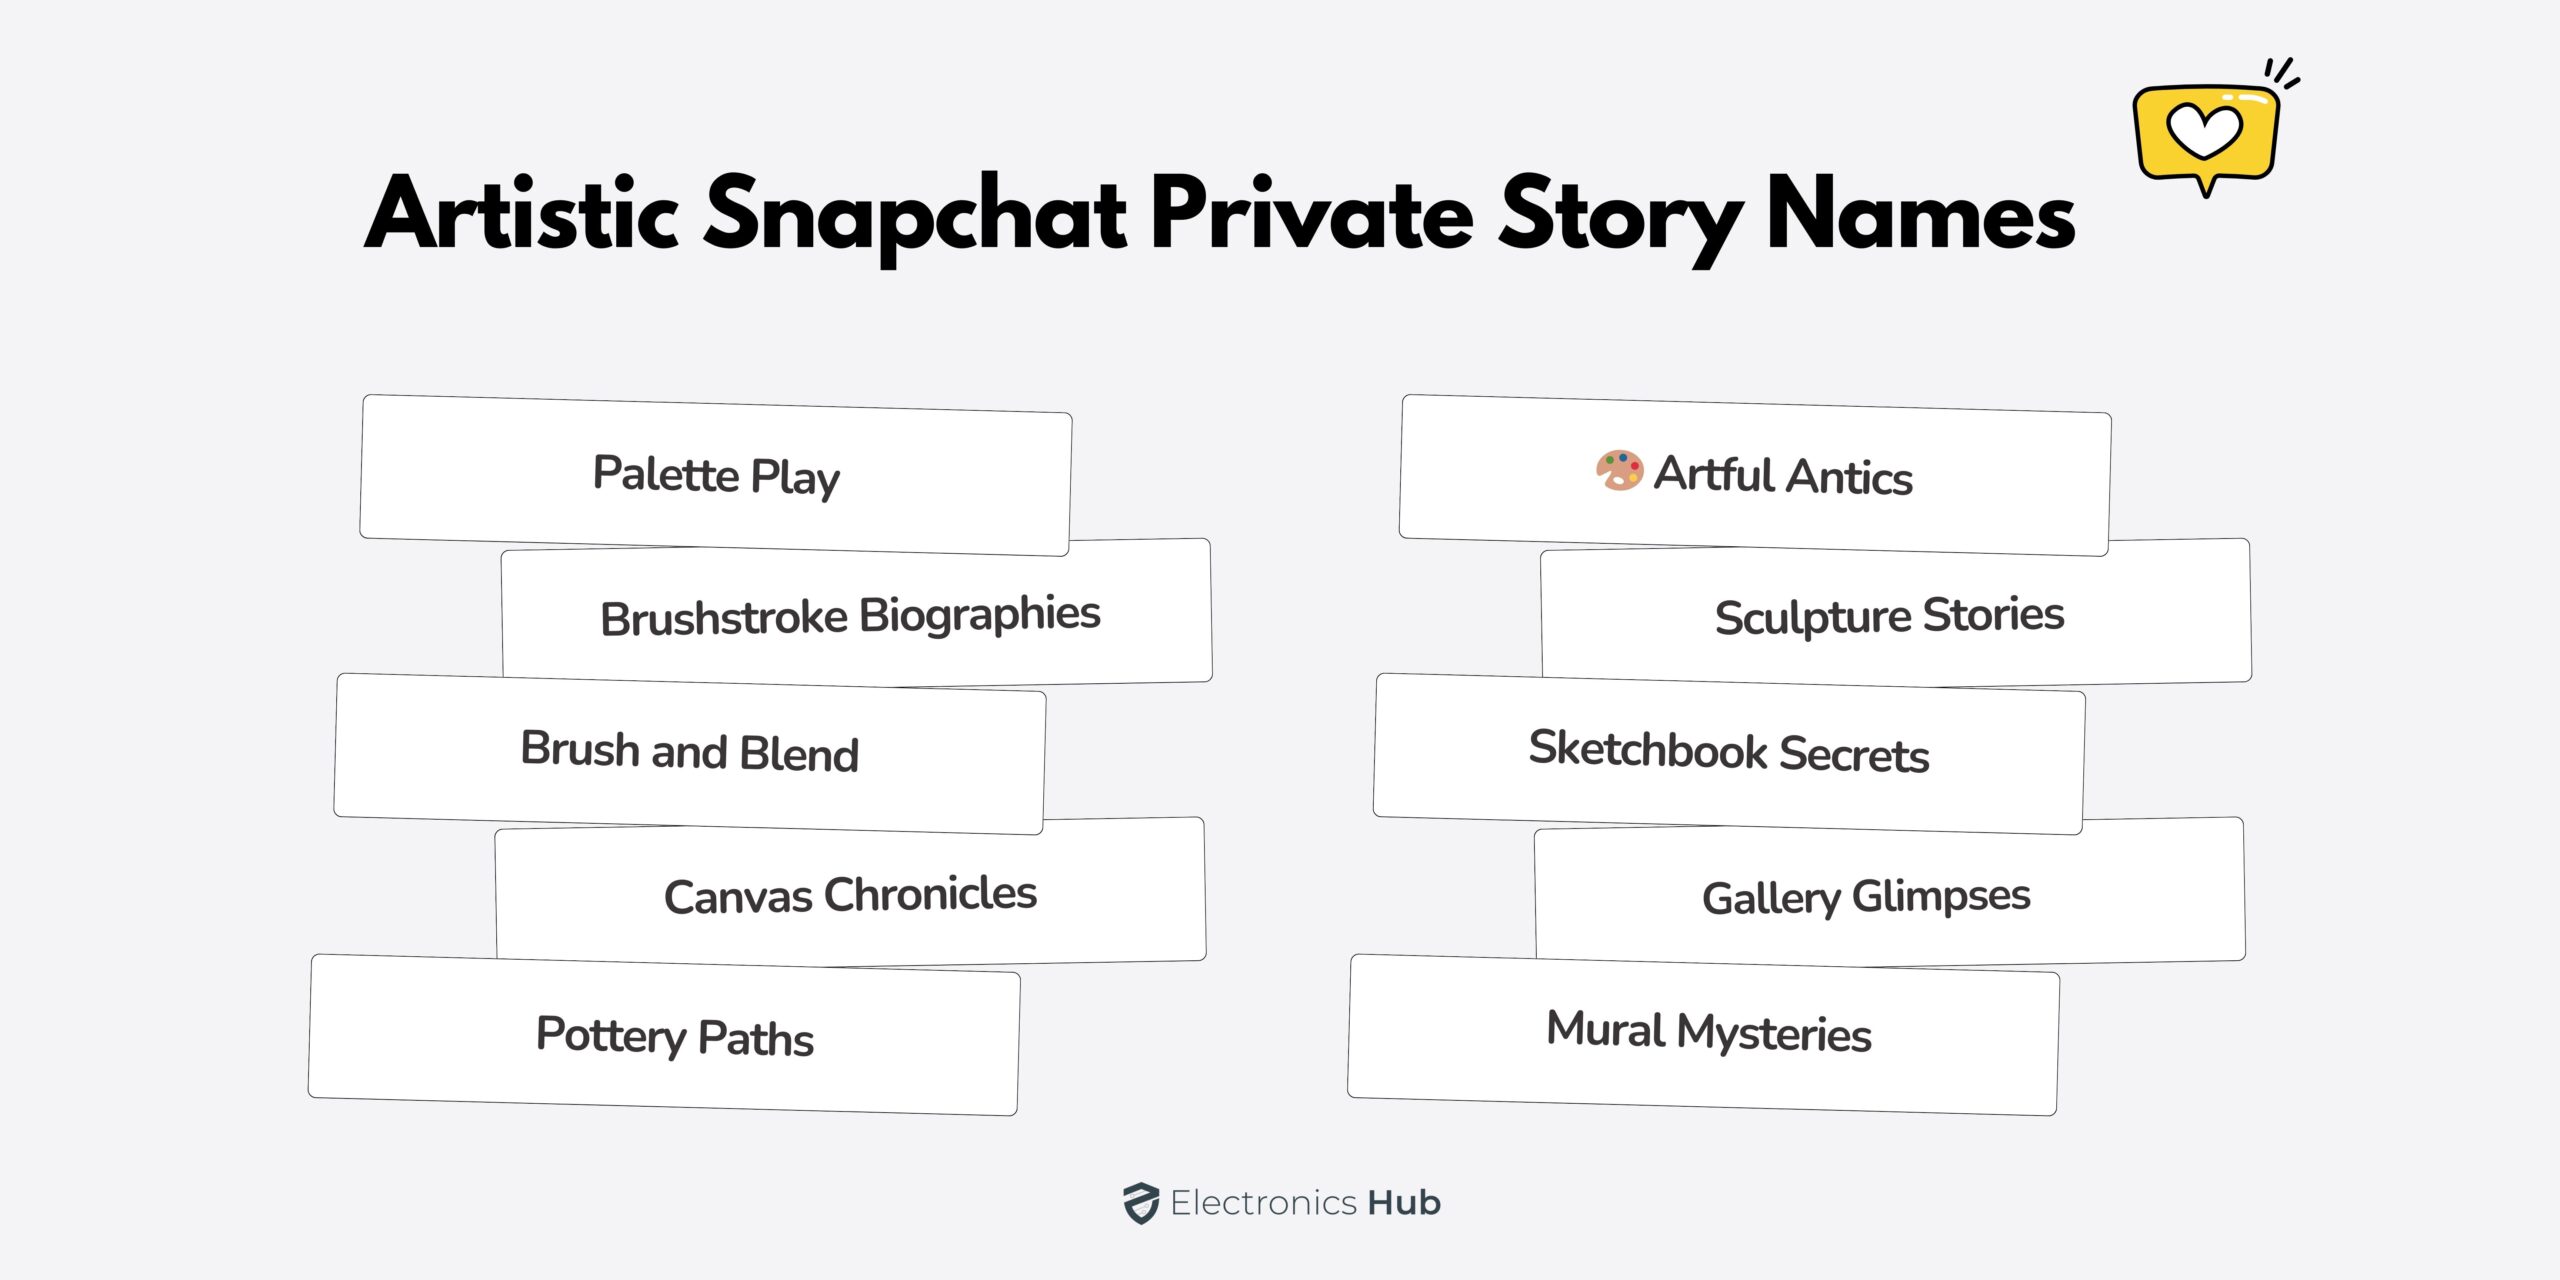 Artistic Snapchat Private Story Names